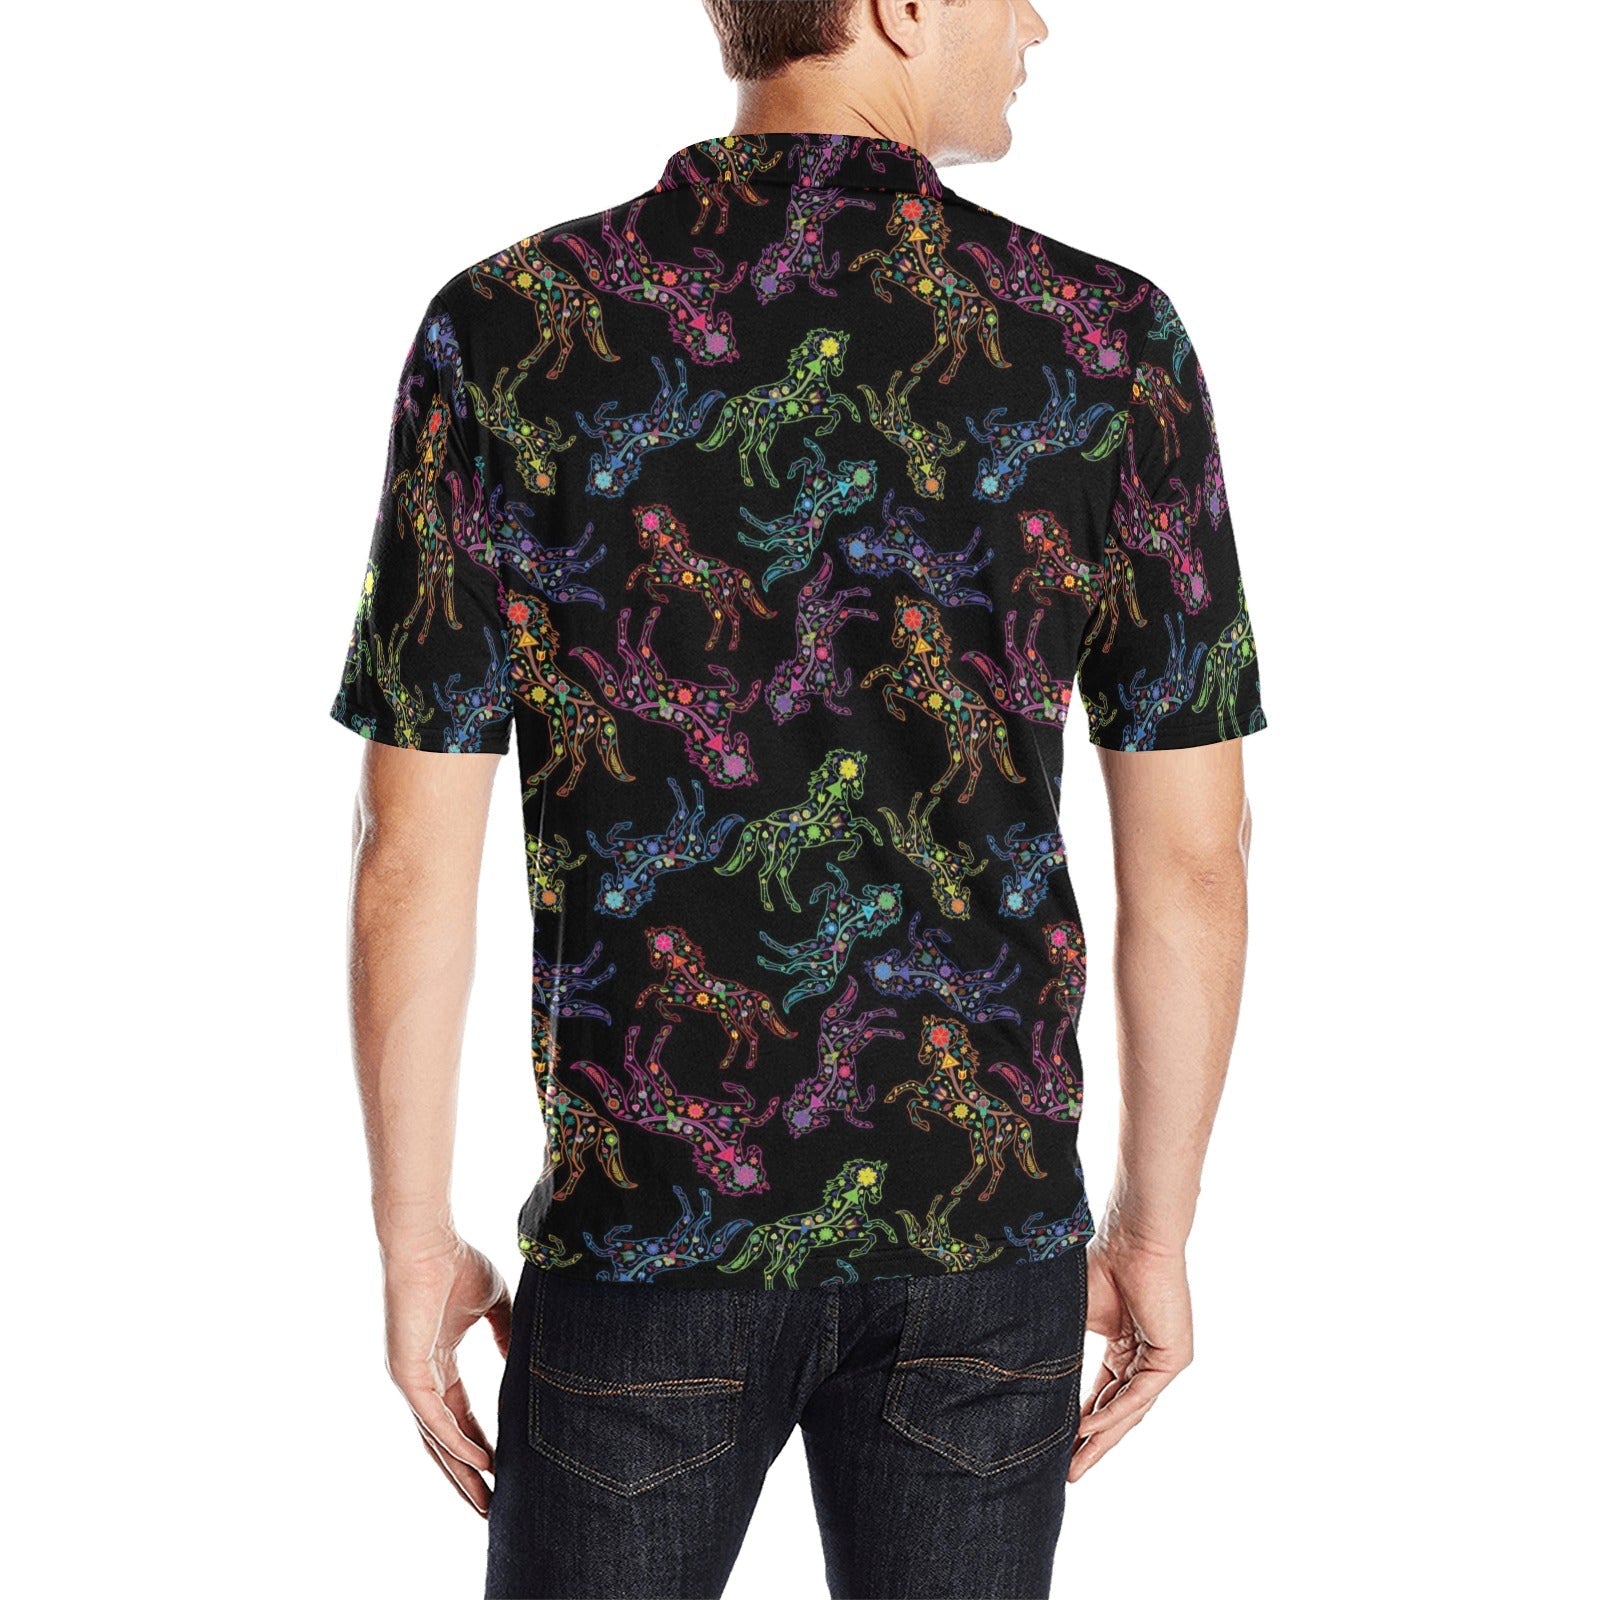 Neon Floral Horses Men's All Over Print Polo Shirt (Model T55) Men's Polo Shirt (Model T55) e-joyer 